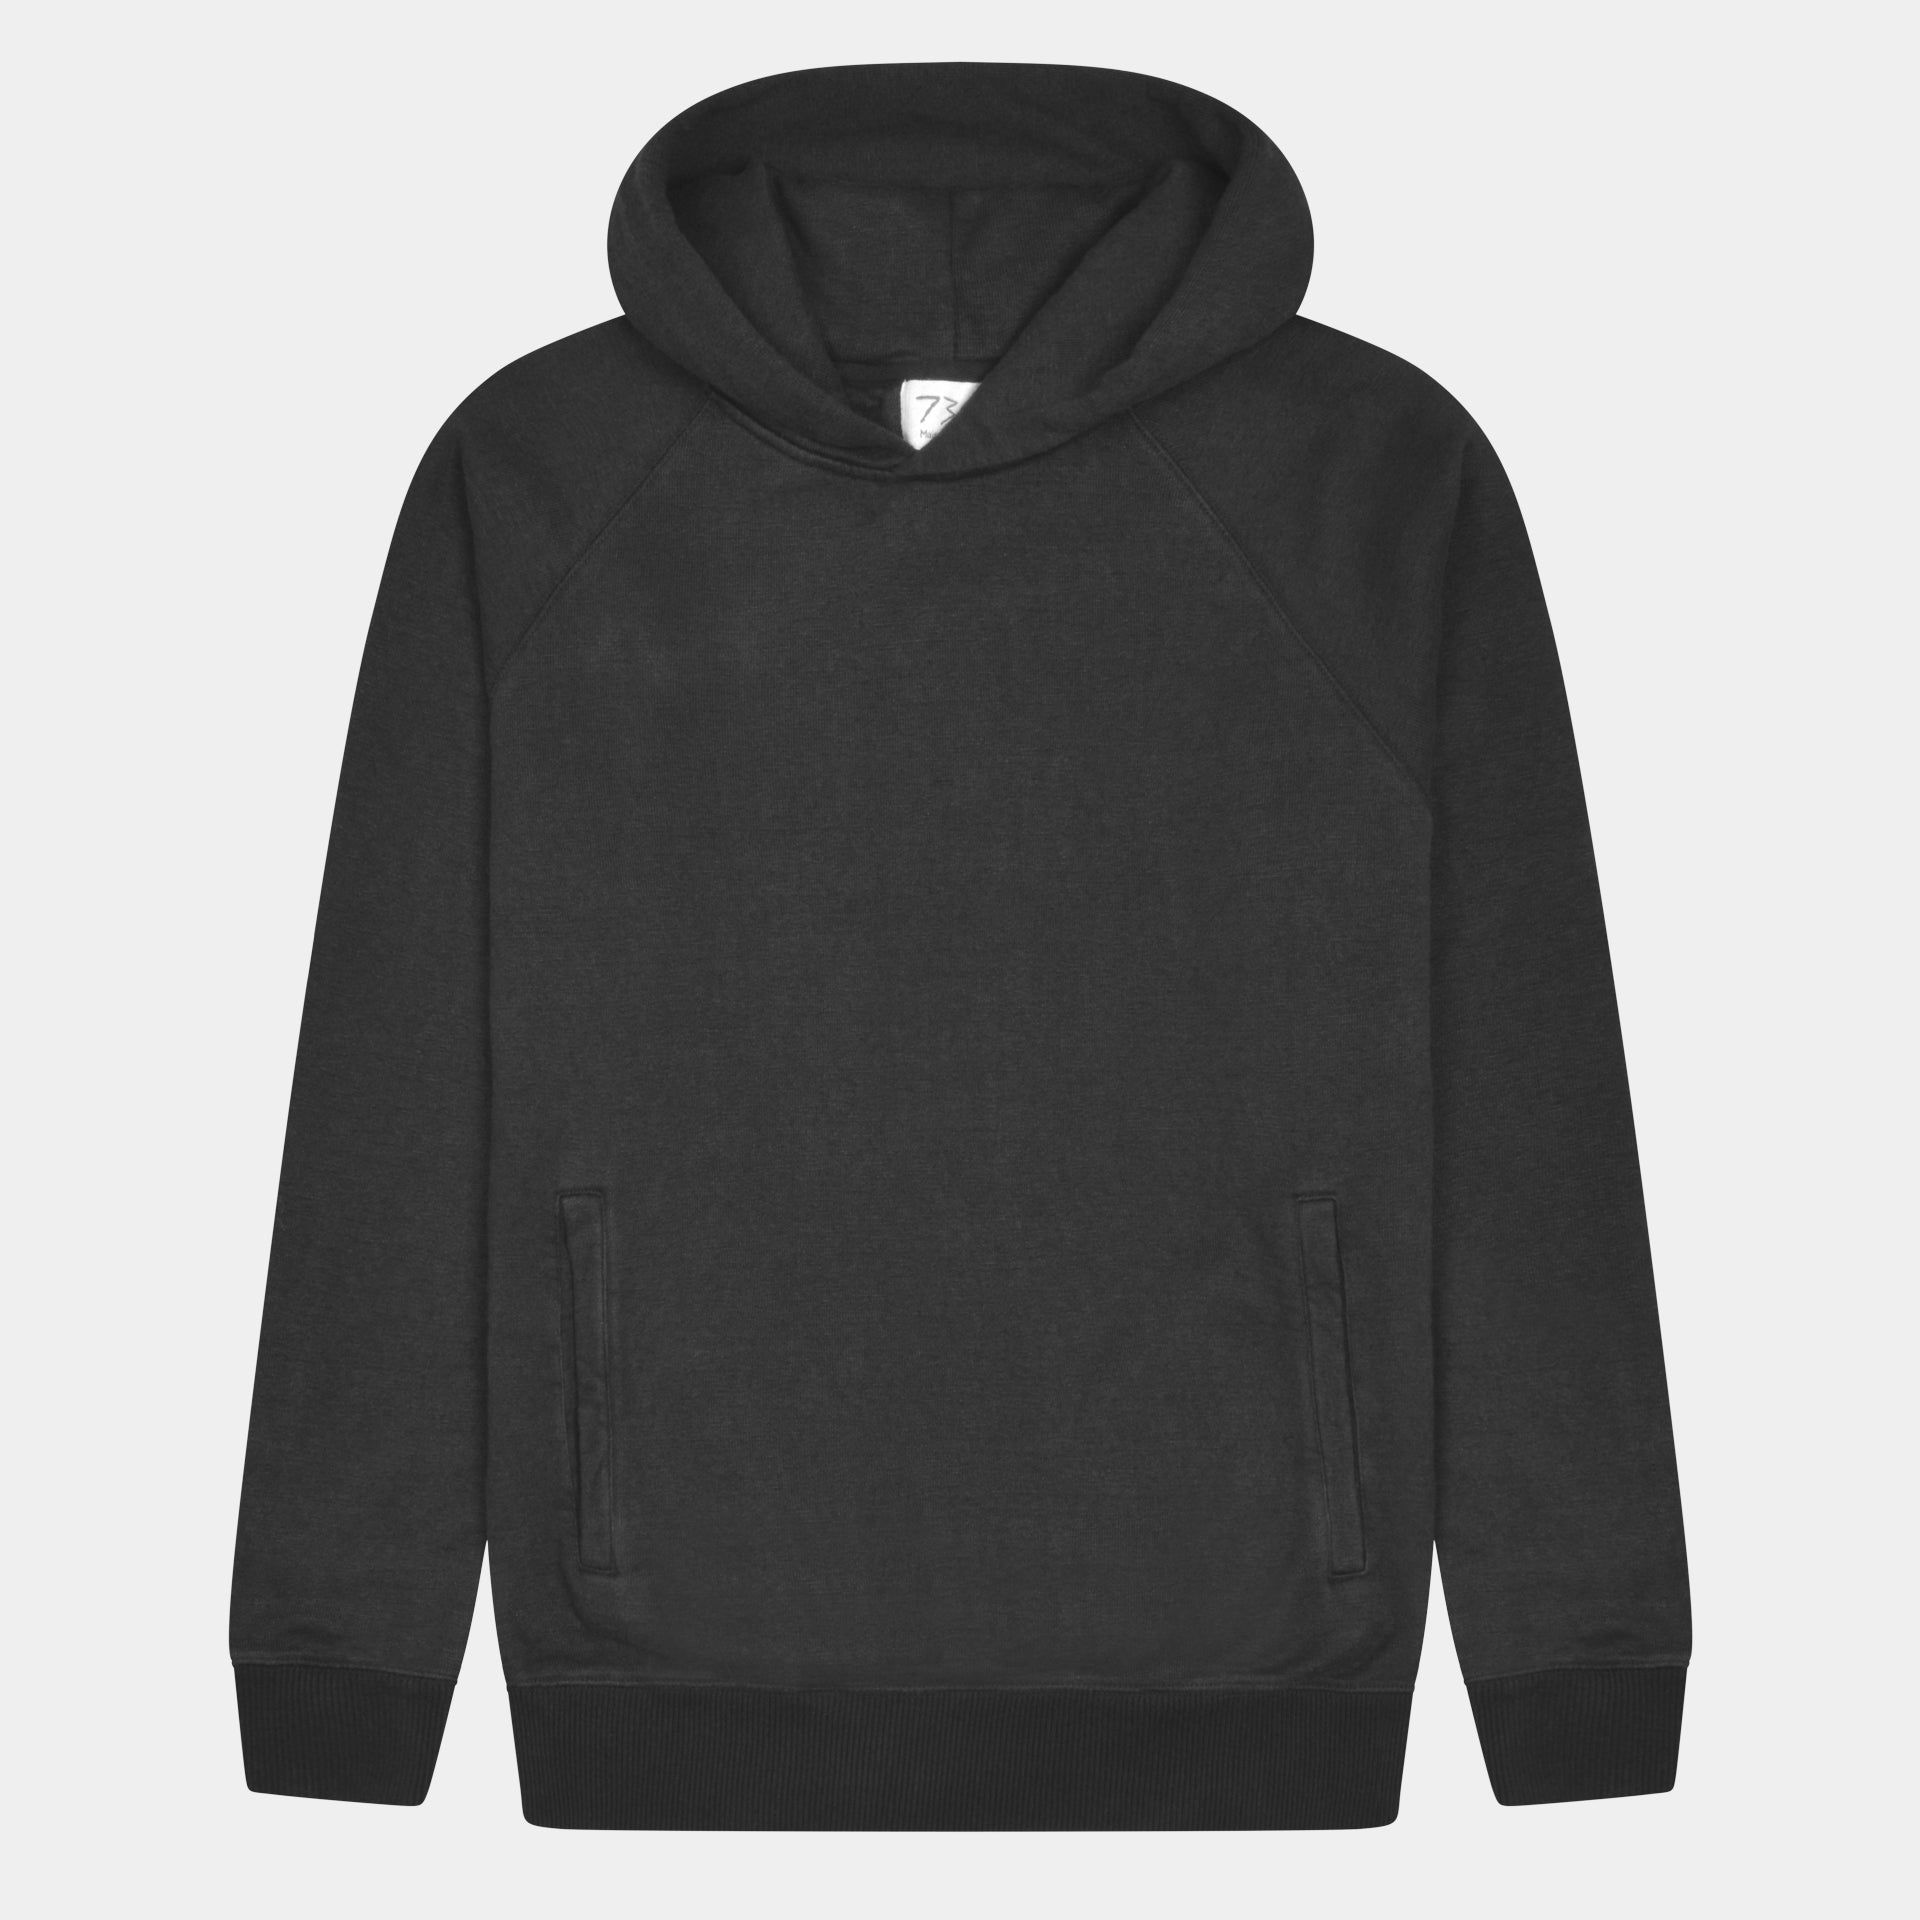 Black hemp hoodie. View from front. Relaxed fit. Natural organic material. Sustainable workout attire. Zero waste, conscious fashion. 